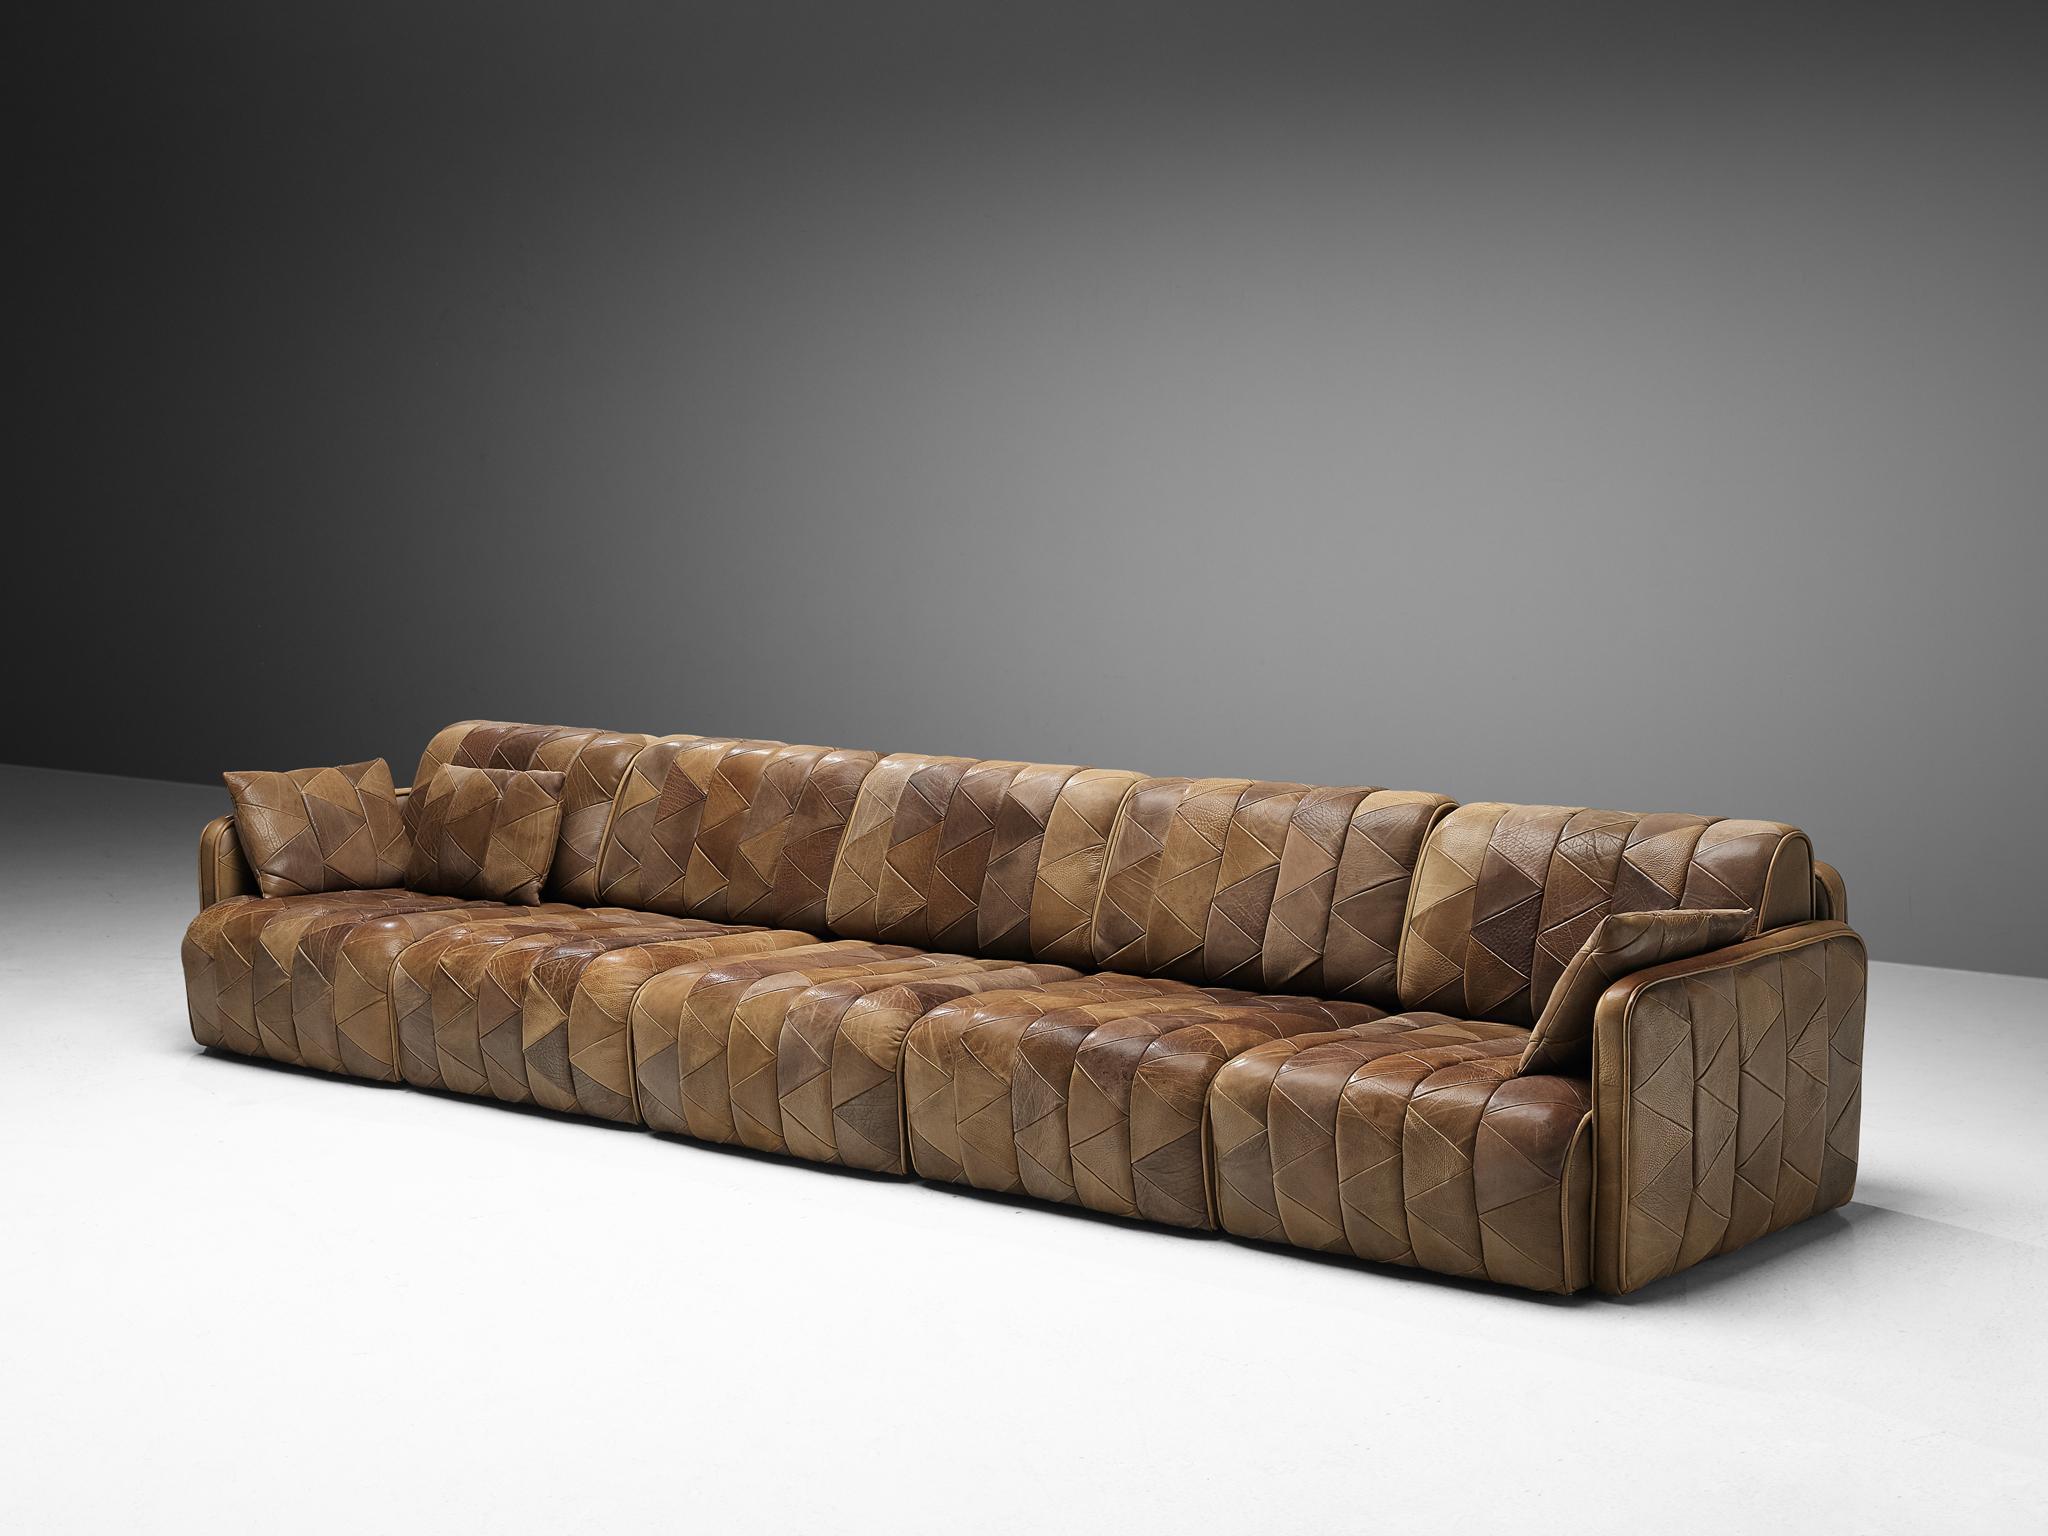 De Sede, sofa, brown patinated leather, 1970s.

This comfortable leather sofa is made by quality manufacturer De Sede in Switzerland. Known for its craftsmanship, highest quality leather, and unique aesthetics, De Sede manufactures furniture that